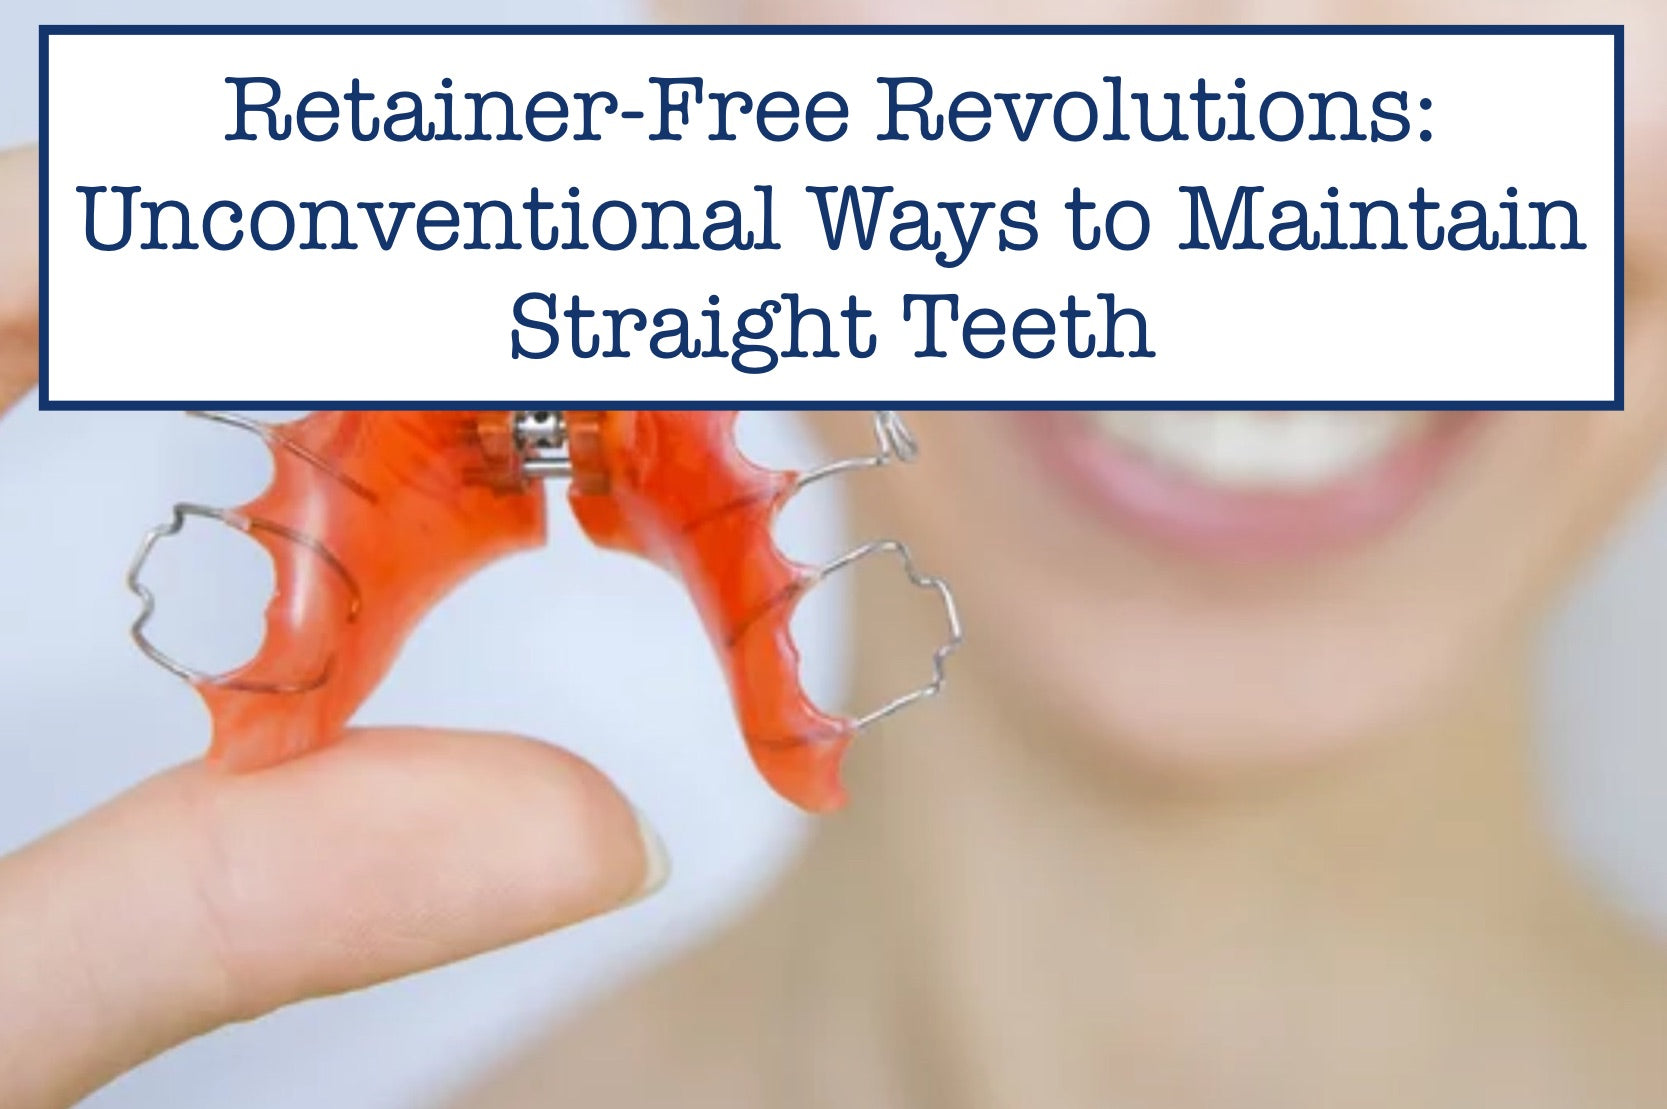 Retainer-Free Revolutions: Unconventional Ways to Maintain Straight Teeth